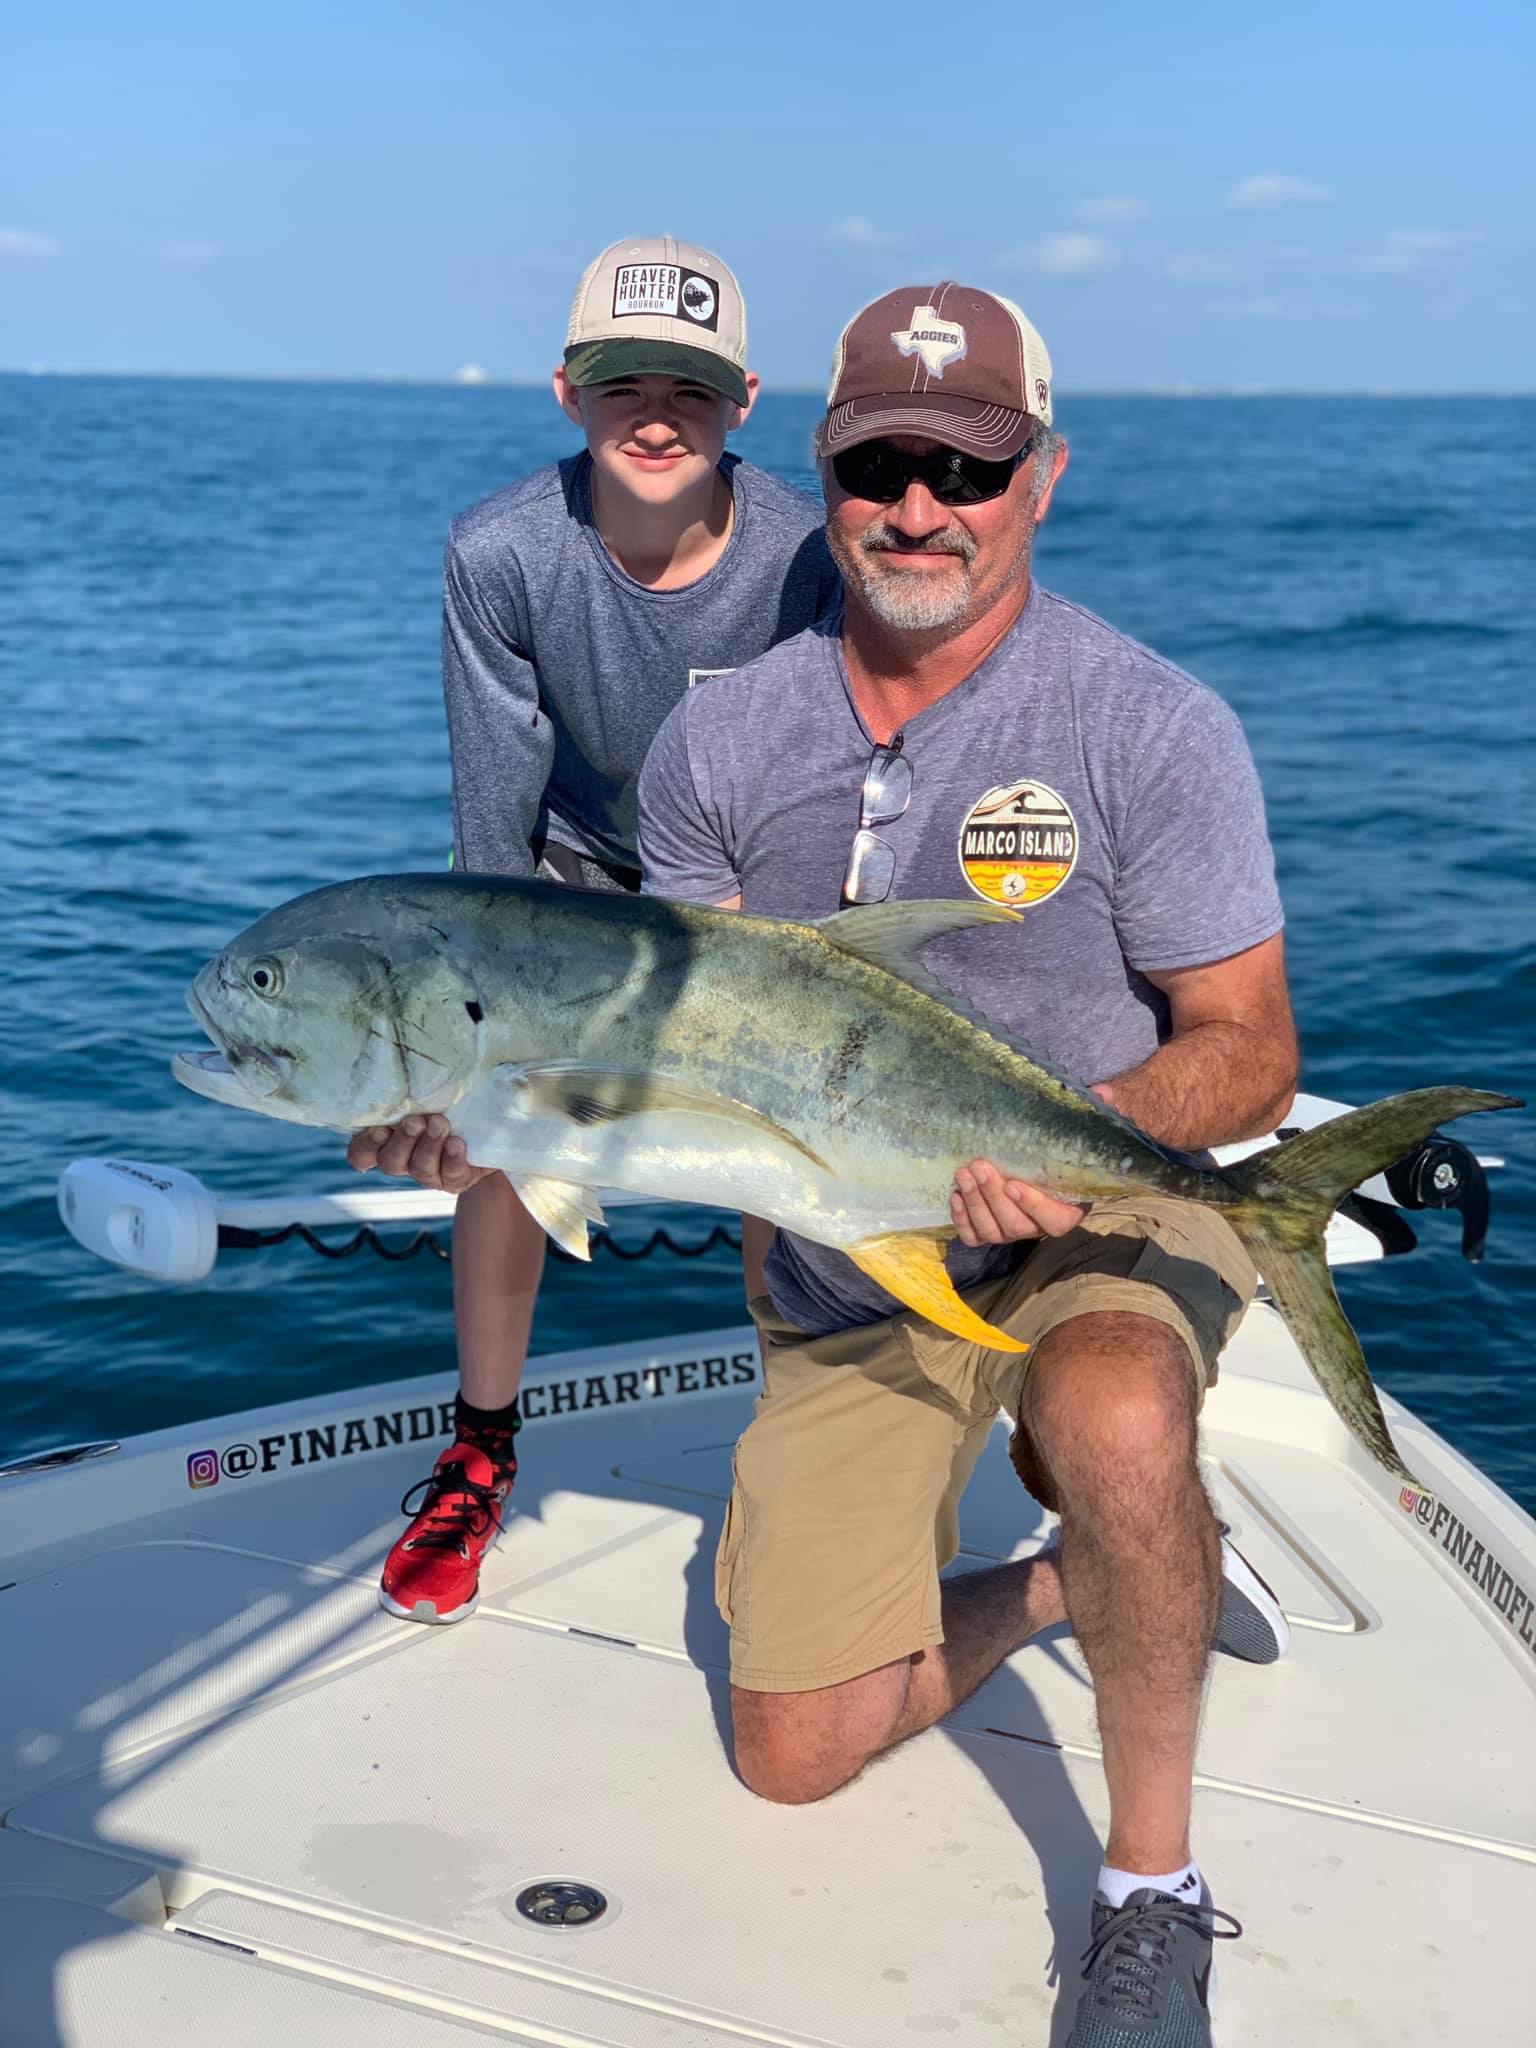 Fin and Fly Fishing Charters - Offshore Charter